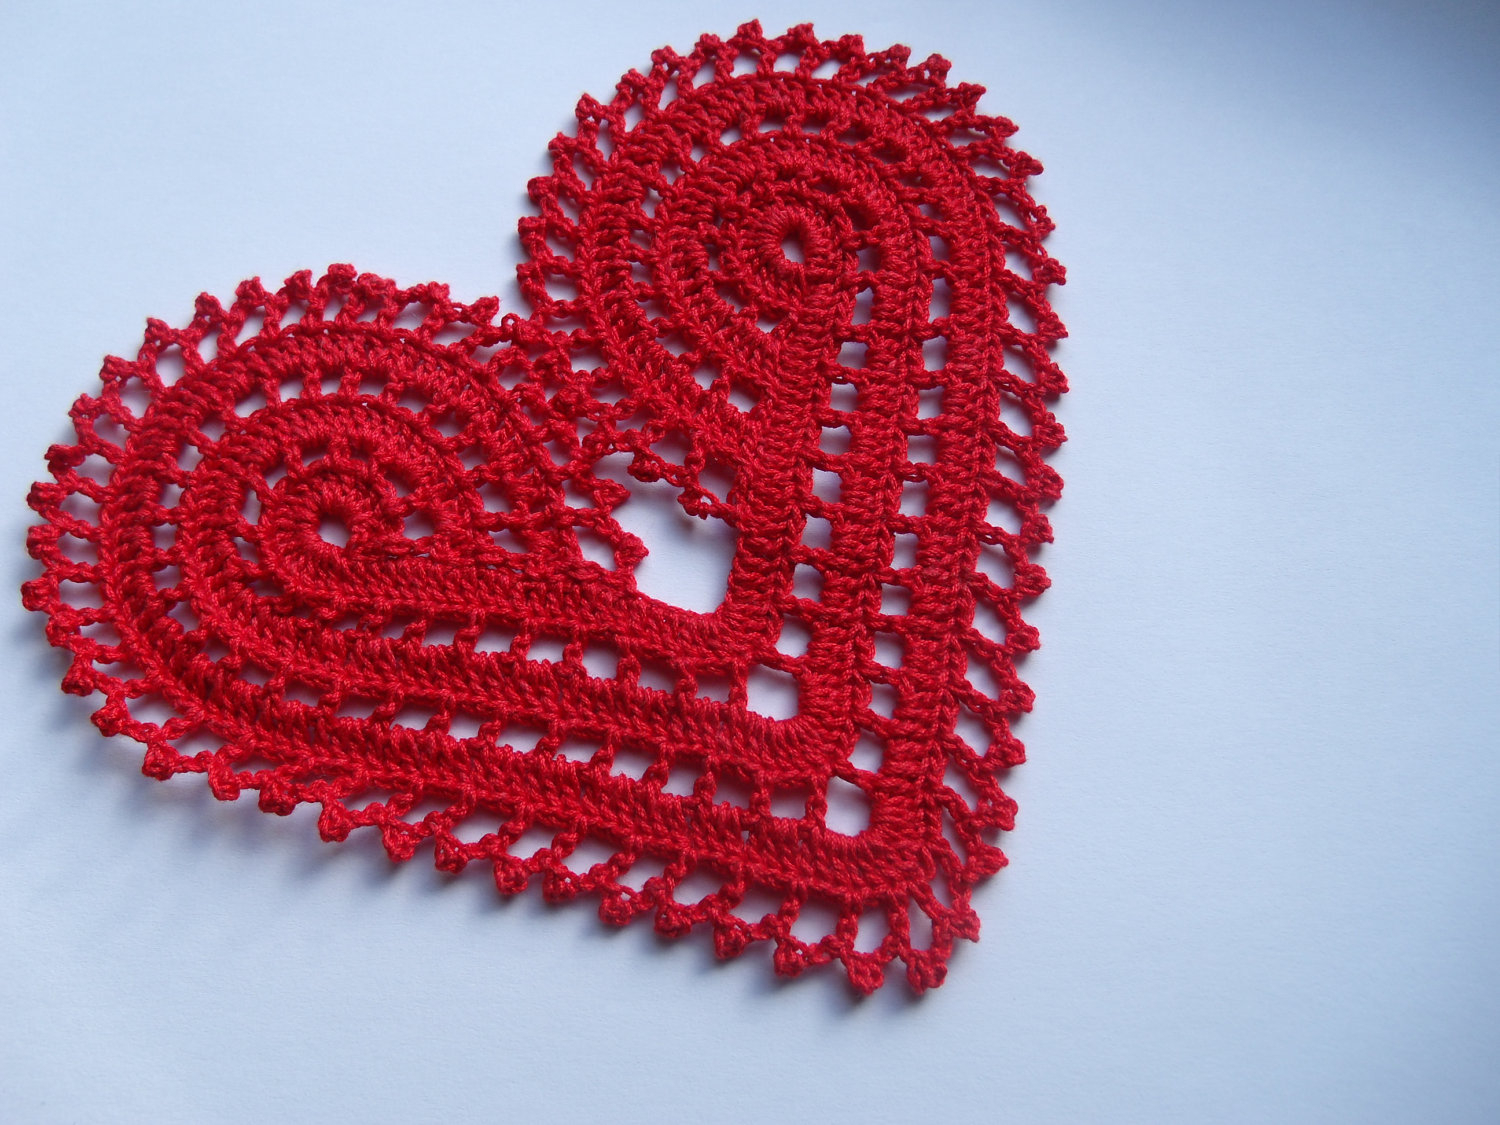 Crochet Heart Patterns Valentine Gifts For Women Crocheted Heart For Fashion Make